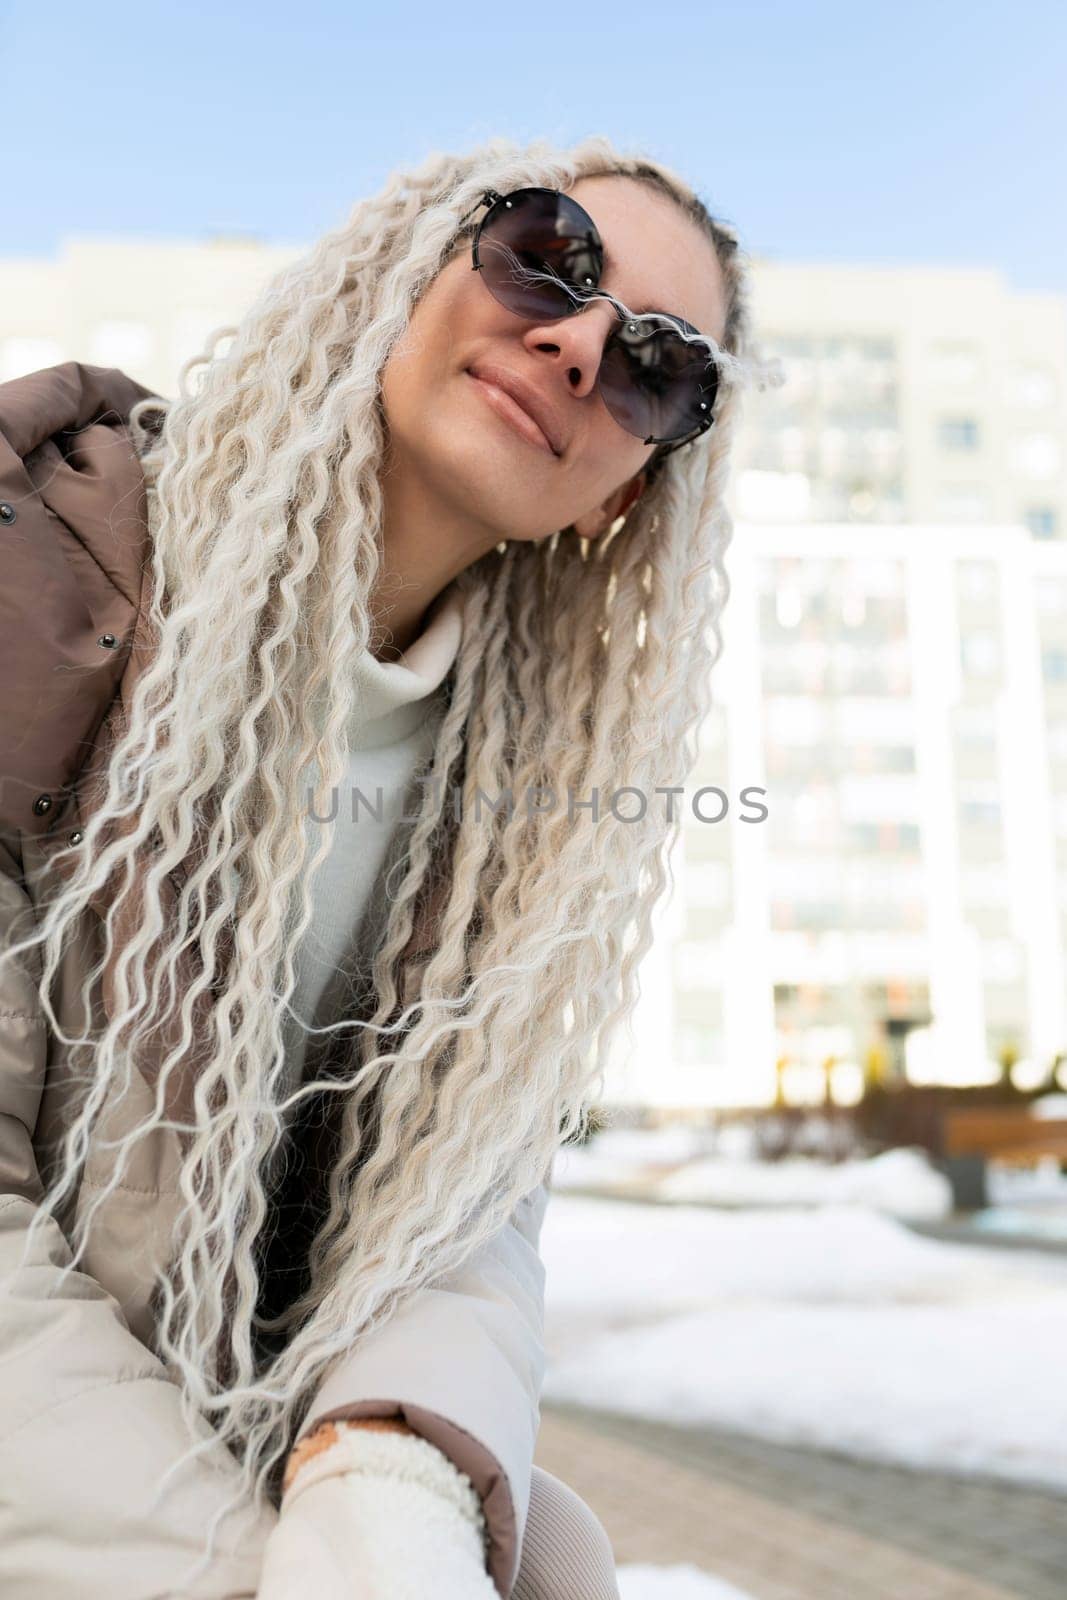 A woman with long blonde hair is wearing stylish sunglasses. She looks confident and fashionable as she stands in the sunlight.